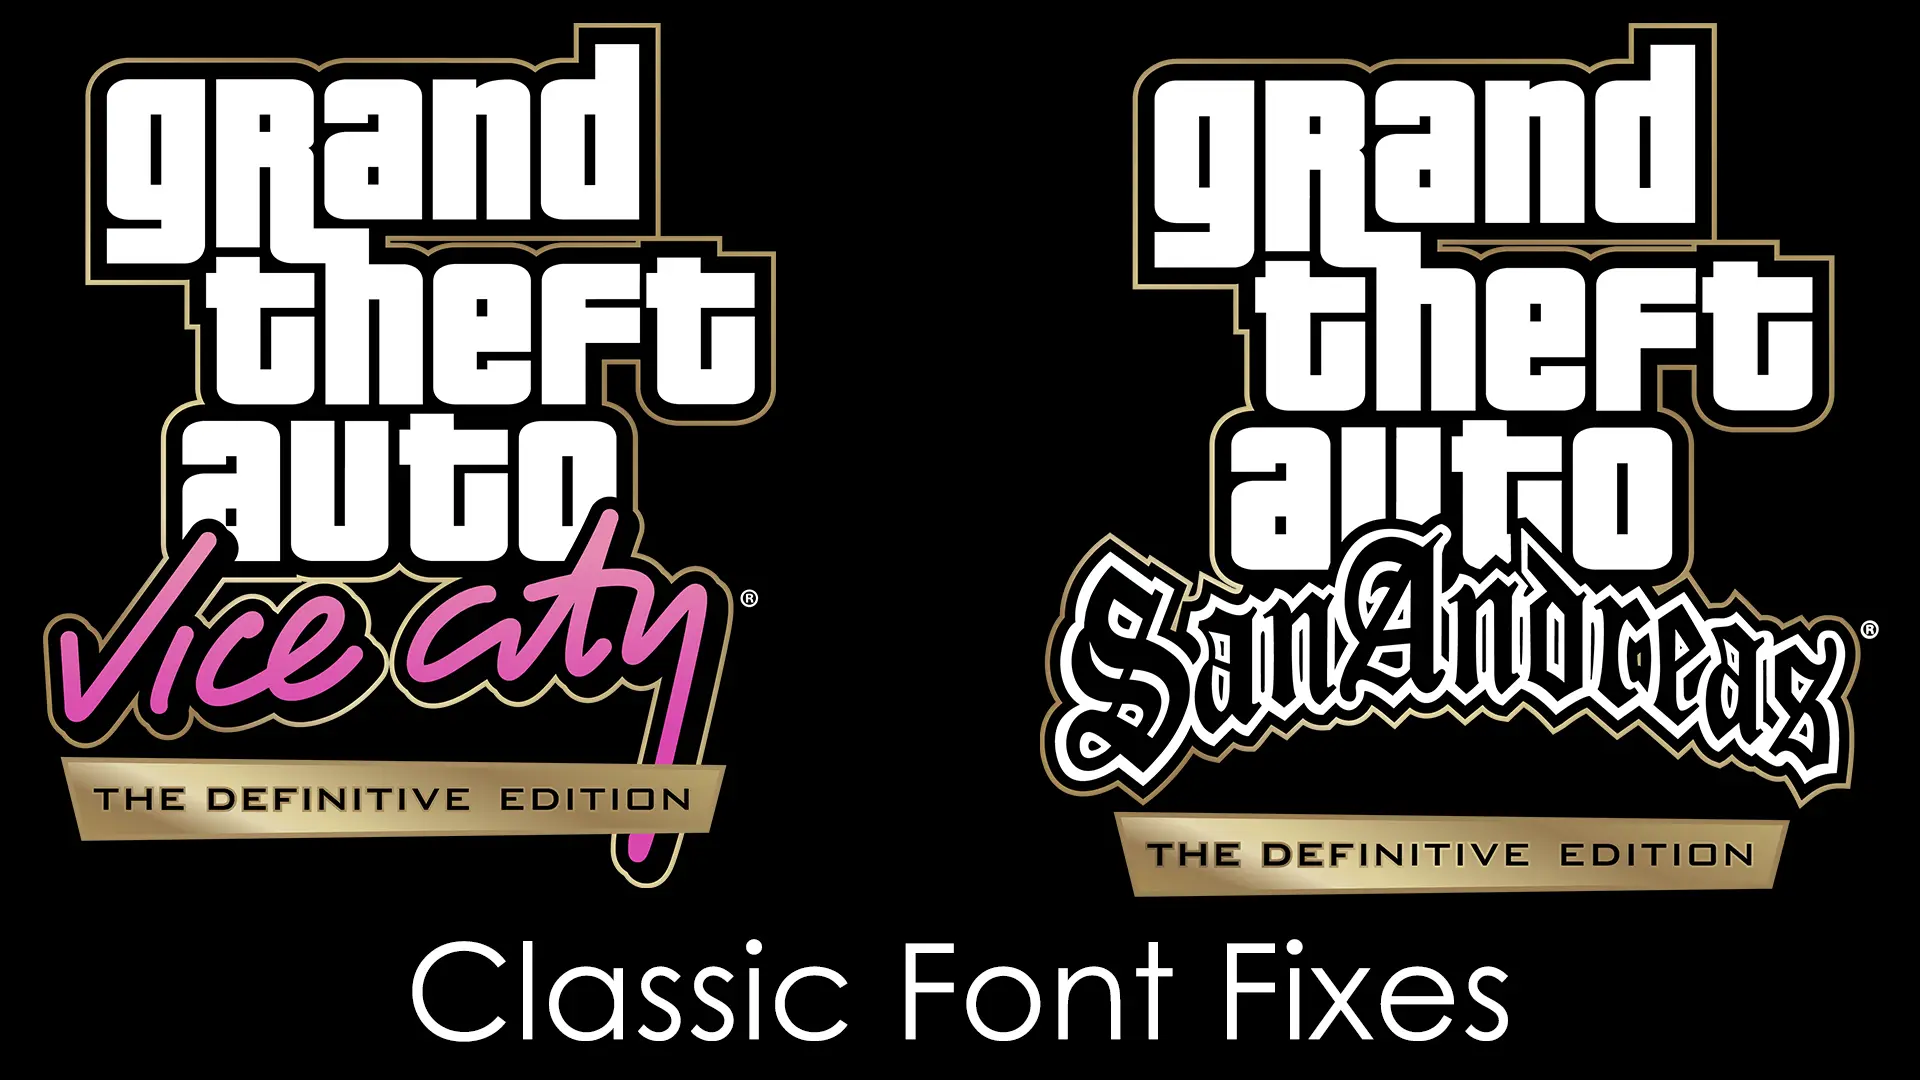 Fixes For Classic Fonts Mod Vice City And San Andreas Definitive Edition At Grand Theft Auto 7438